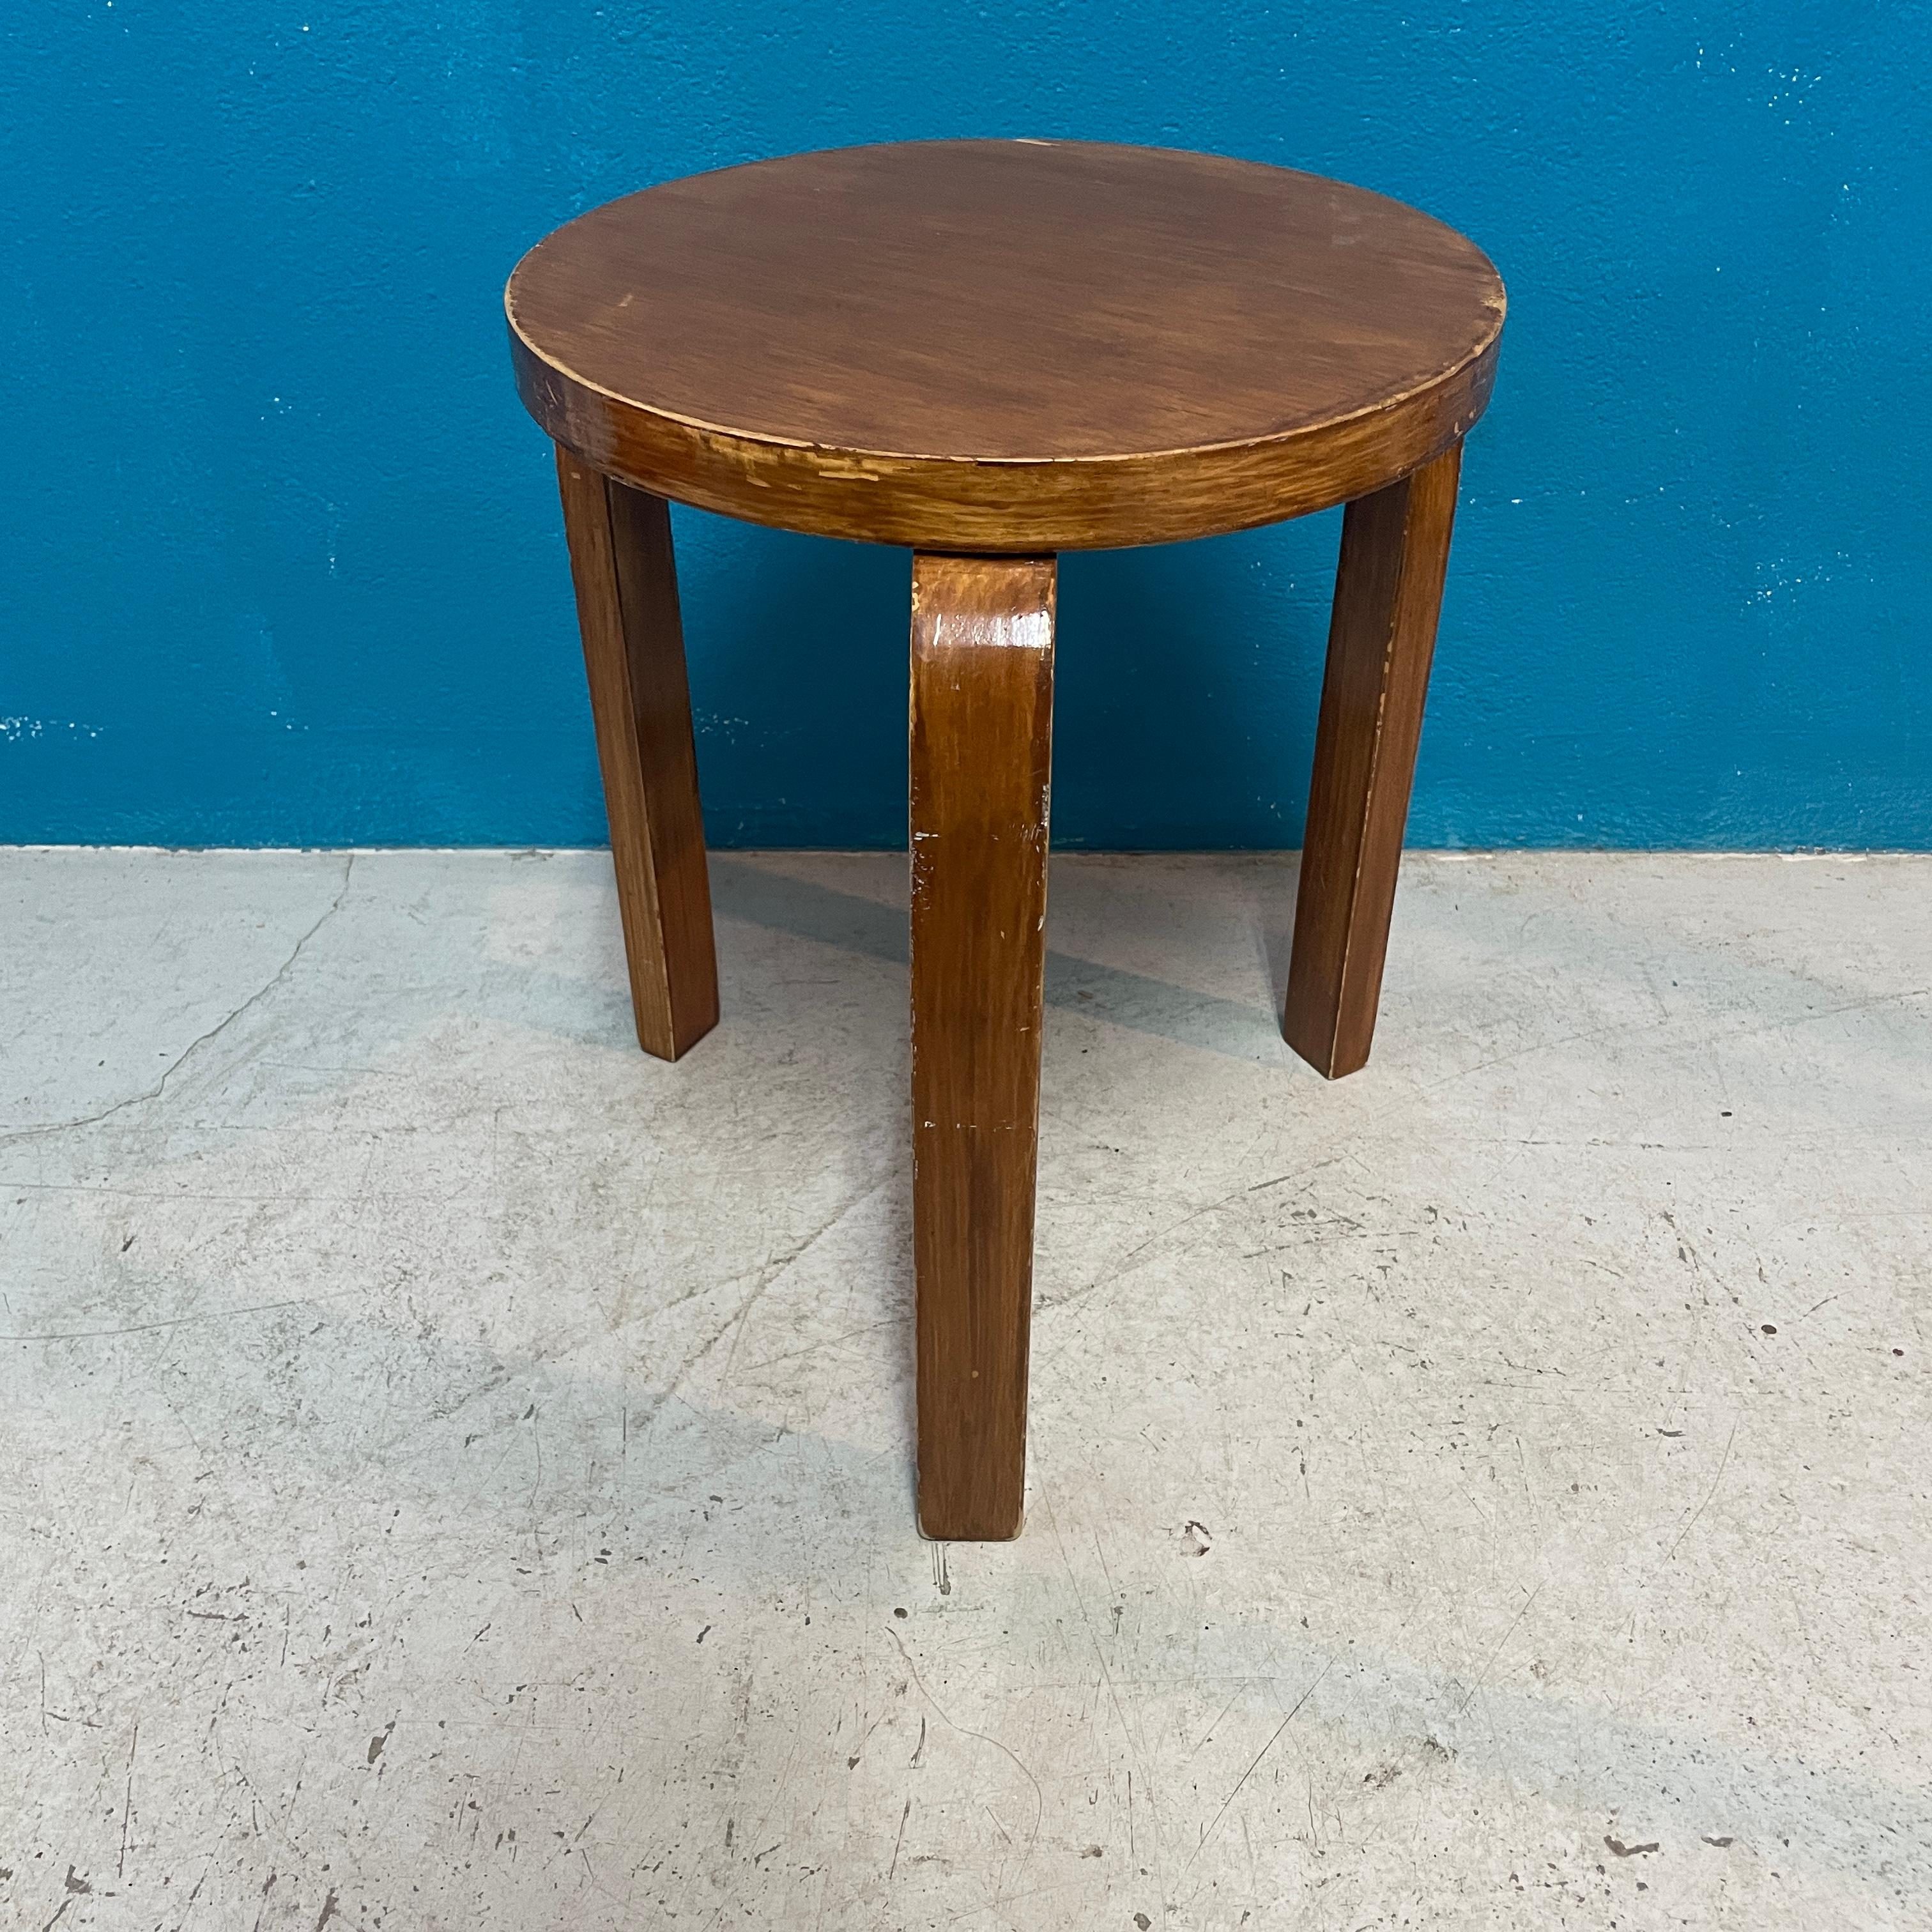 Iconic Aalto three-legged stool. Stool 60 was officially unveiled to an enthusiastic public in London at a Finnish furniture review in November 1933.
The stool’s revolutionary L-leg structure was a major boost for the modern Scandinavian design